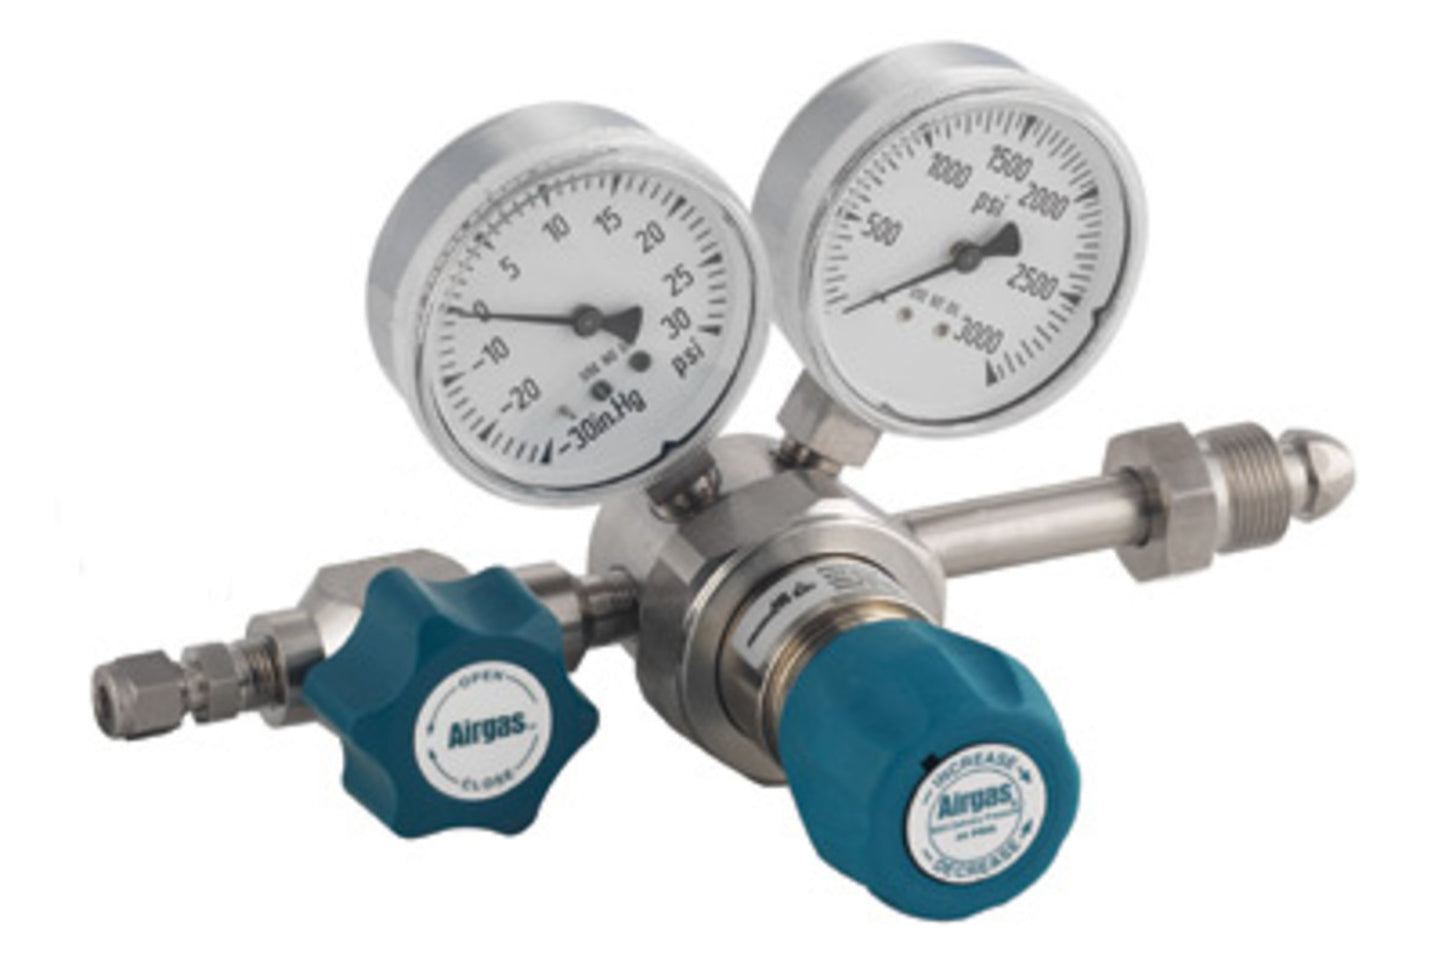 Airgas Model C444G296 Stainless Steel High Purity Single Stage Pressure Regulator With 1/4" FNPT Connection And Threadless Seat